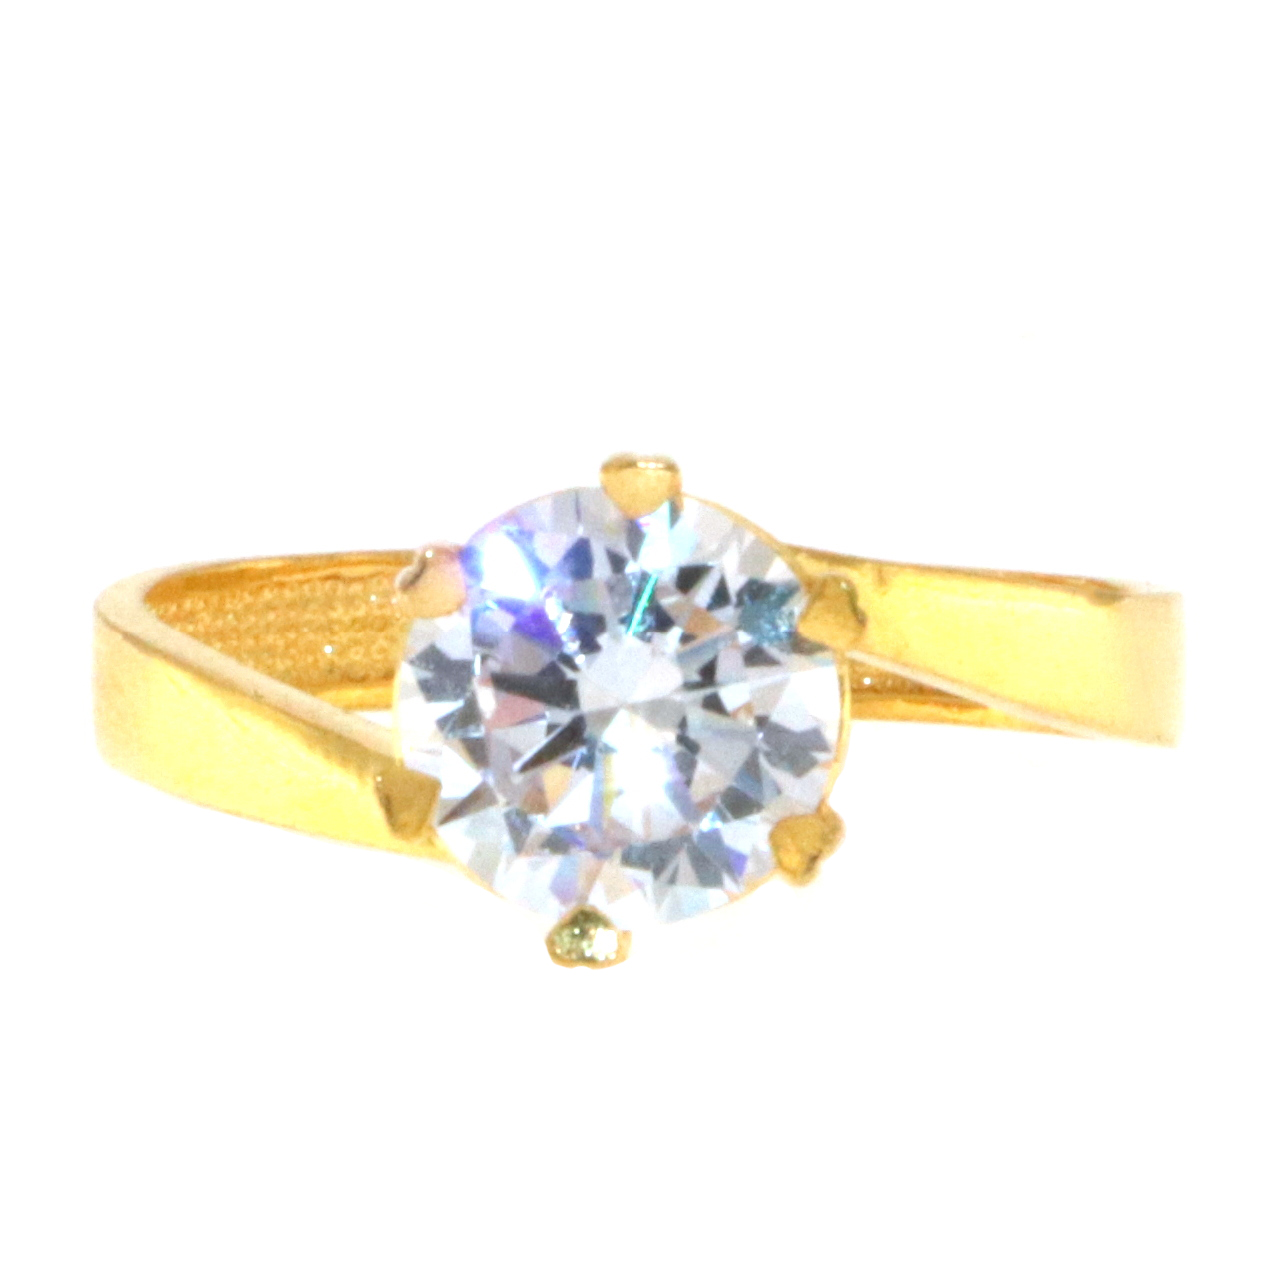 22carat Gold Hearts Solitaire Ring